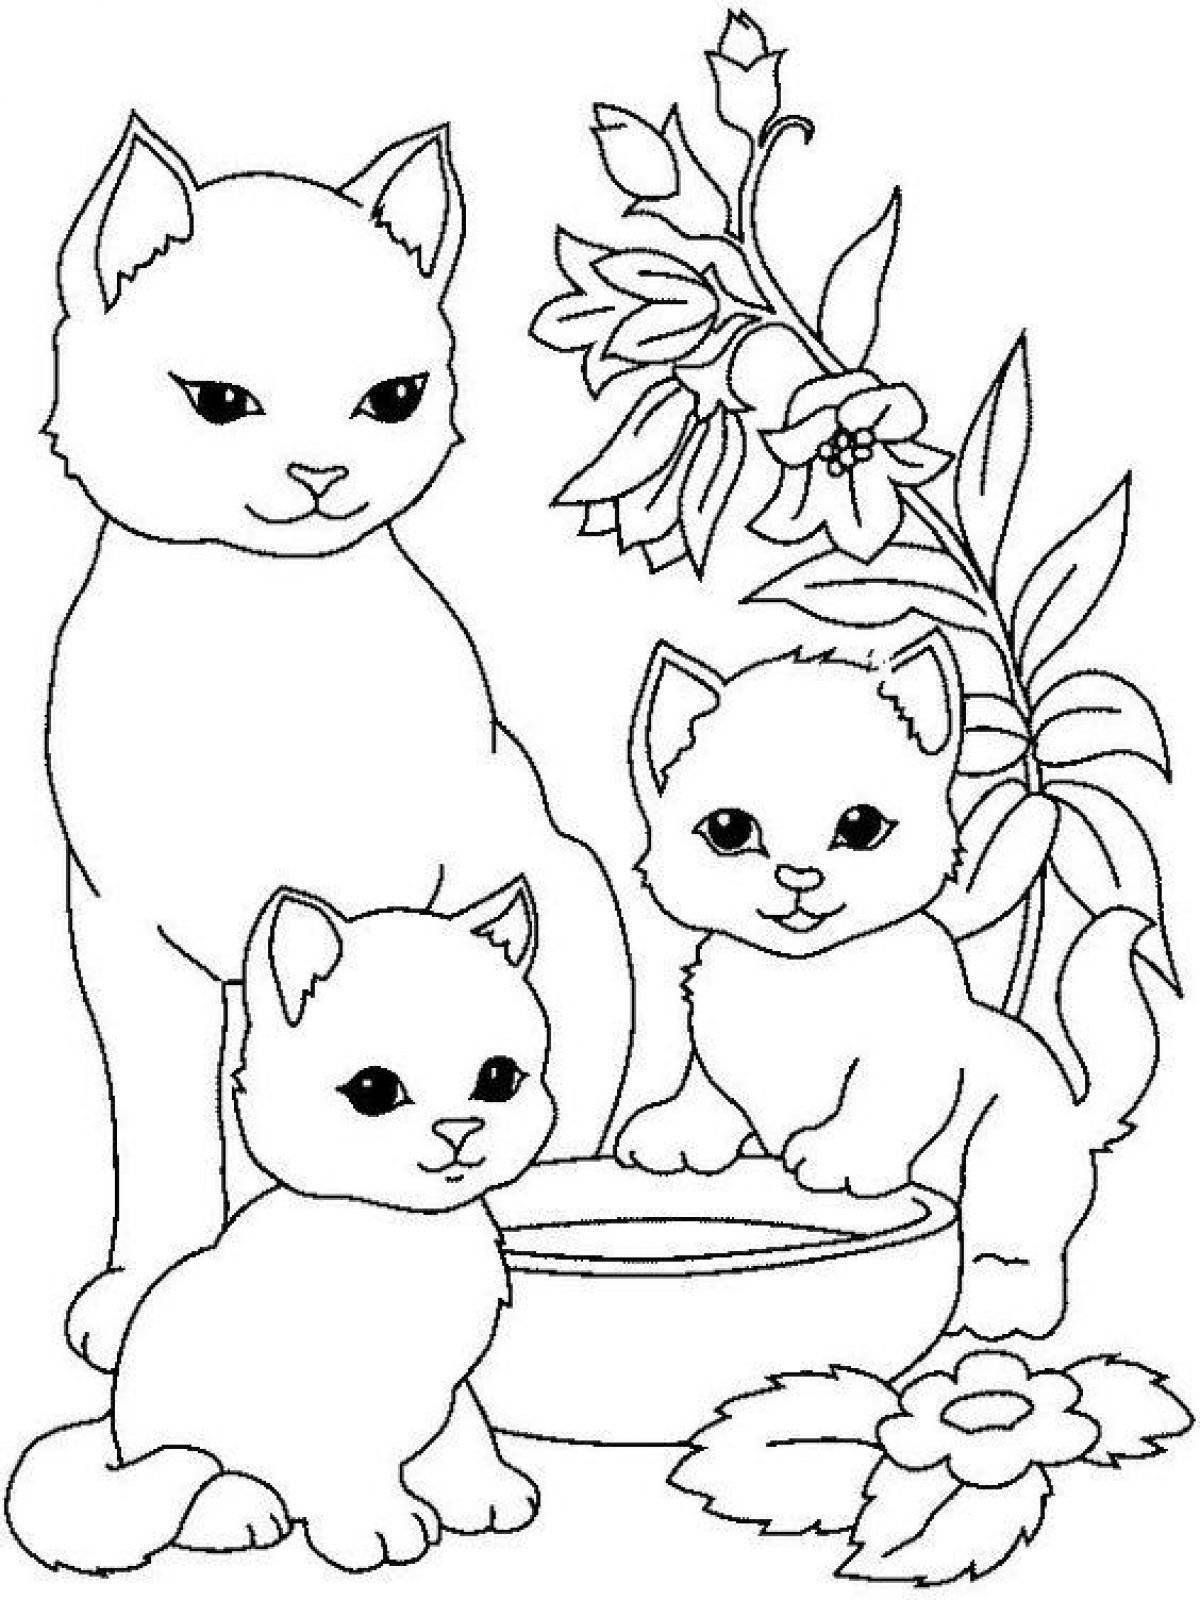 Coloring book 9 years old for cat girls